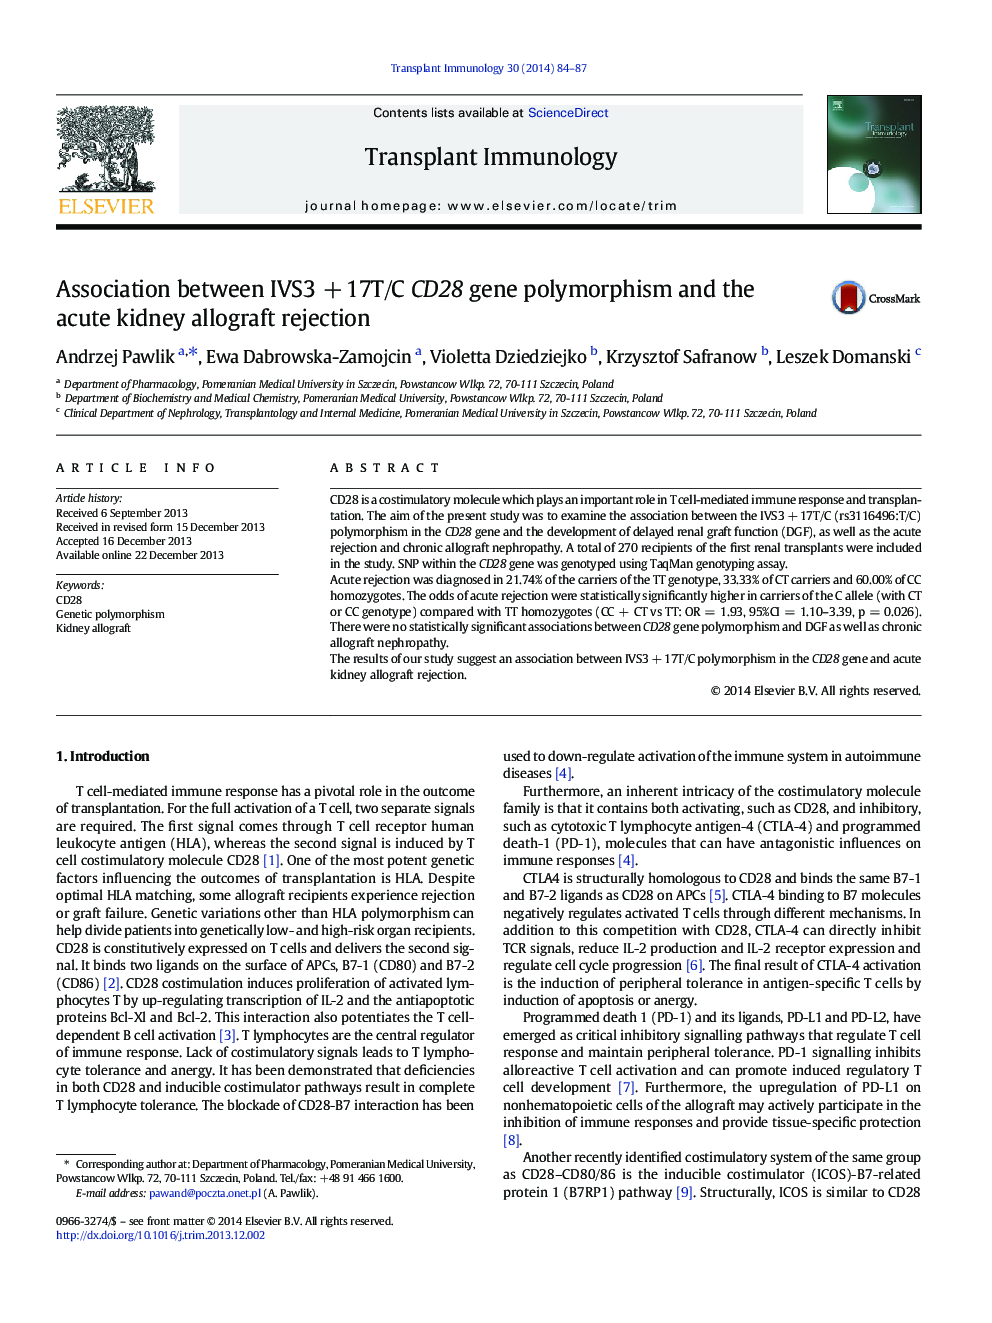 Association between IVS3 + 17T/C CD28 gene polymorphism and the acute kidney allograft rejection